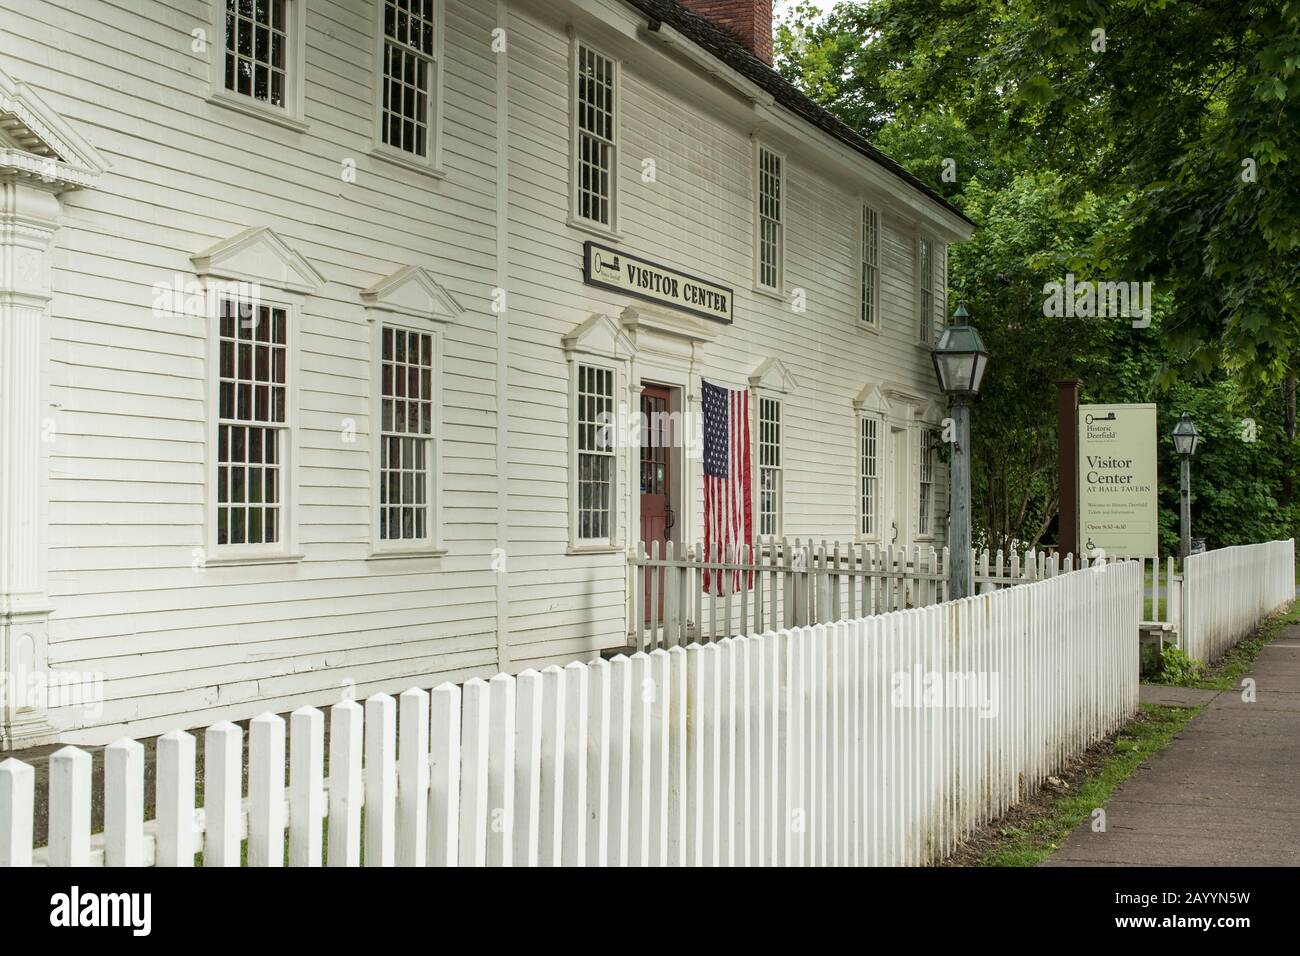 Historic Deerfield, Inc. was founded in 1952. It's an outdoor historic village and museum that interprets the culture and history of early New England Stock Photo